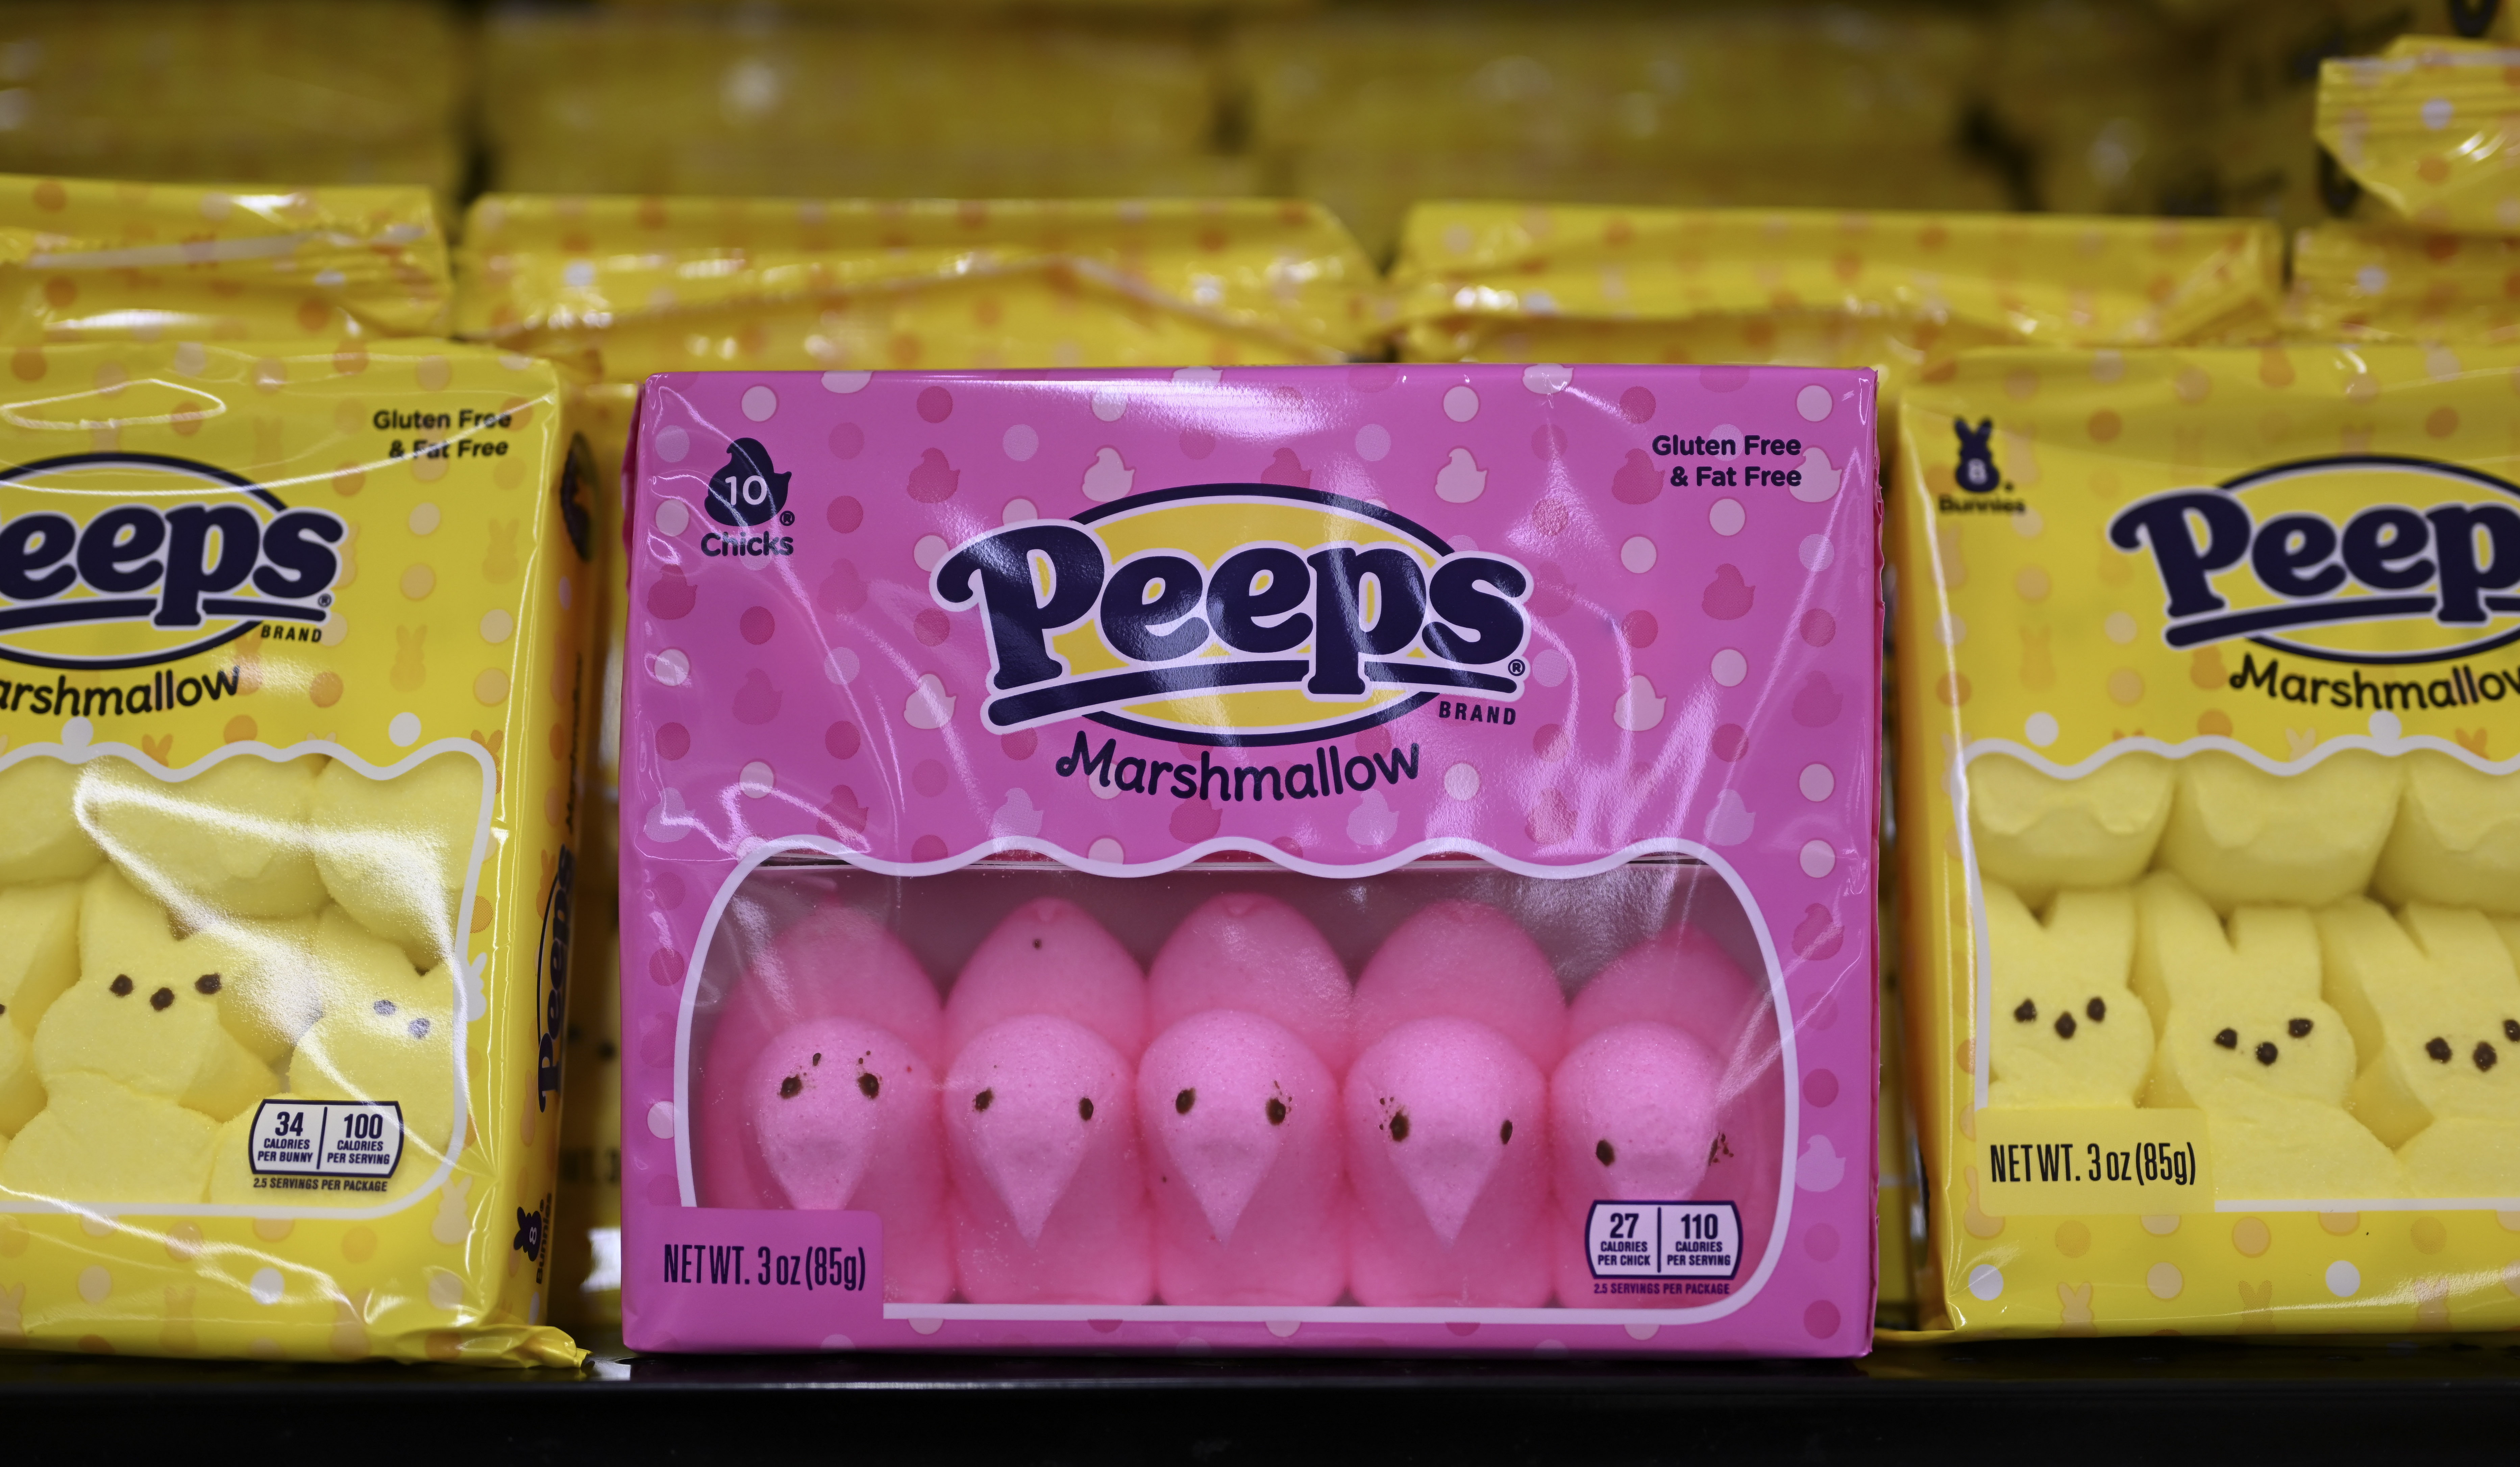 Peeps in their package on a store shelf.